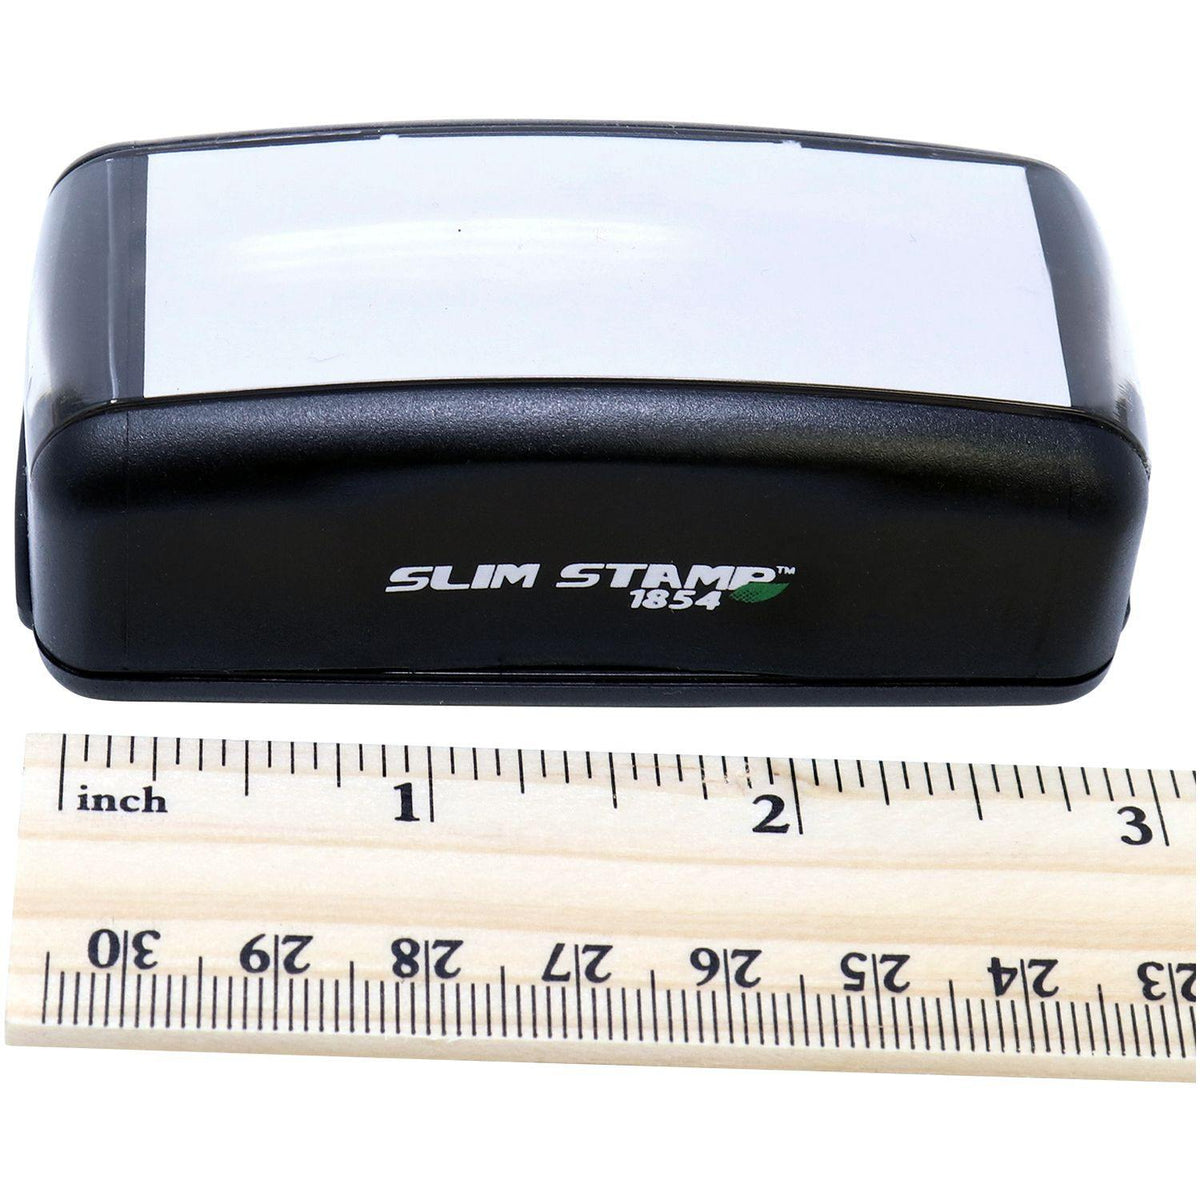 Measurement Large Pre-Inked Official Use Only Stamp with Ruler